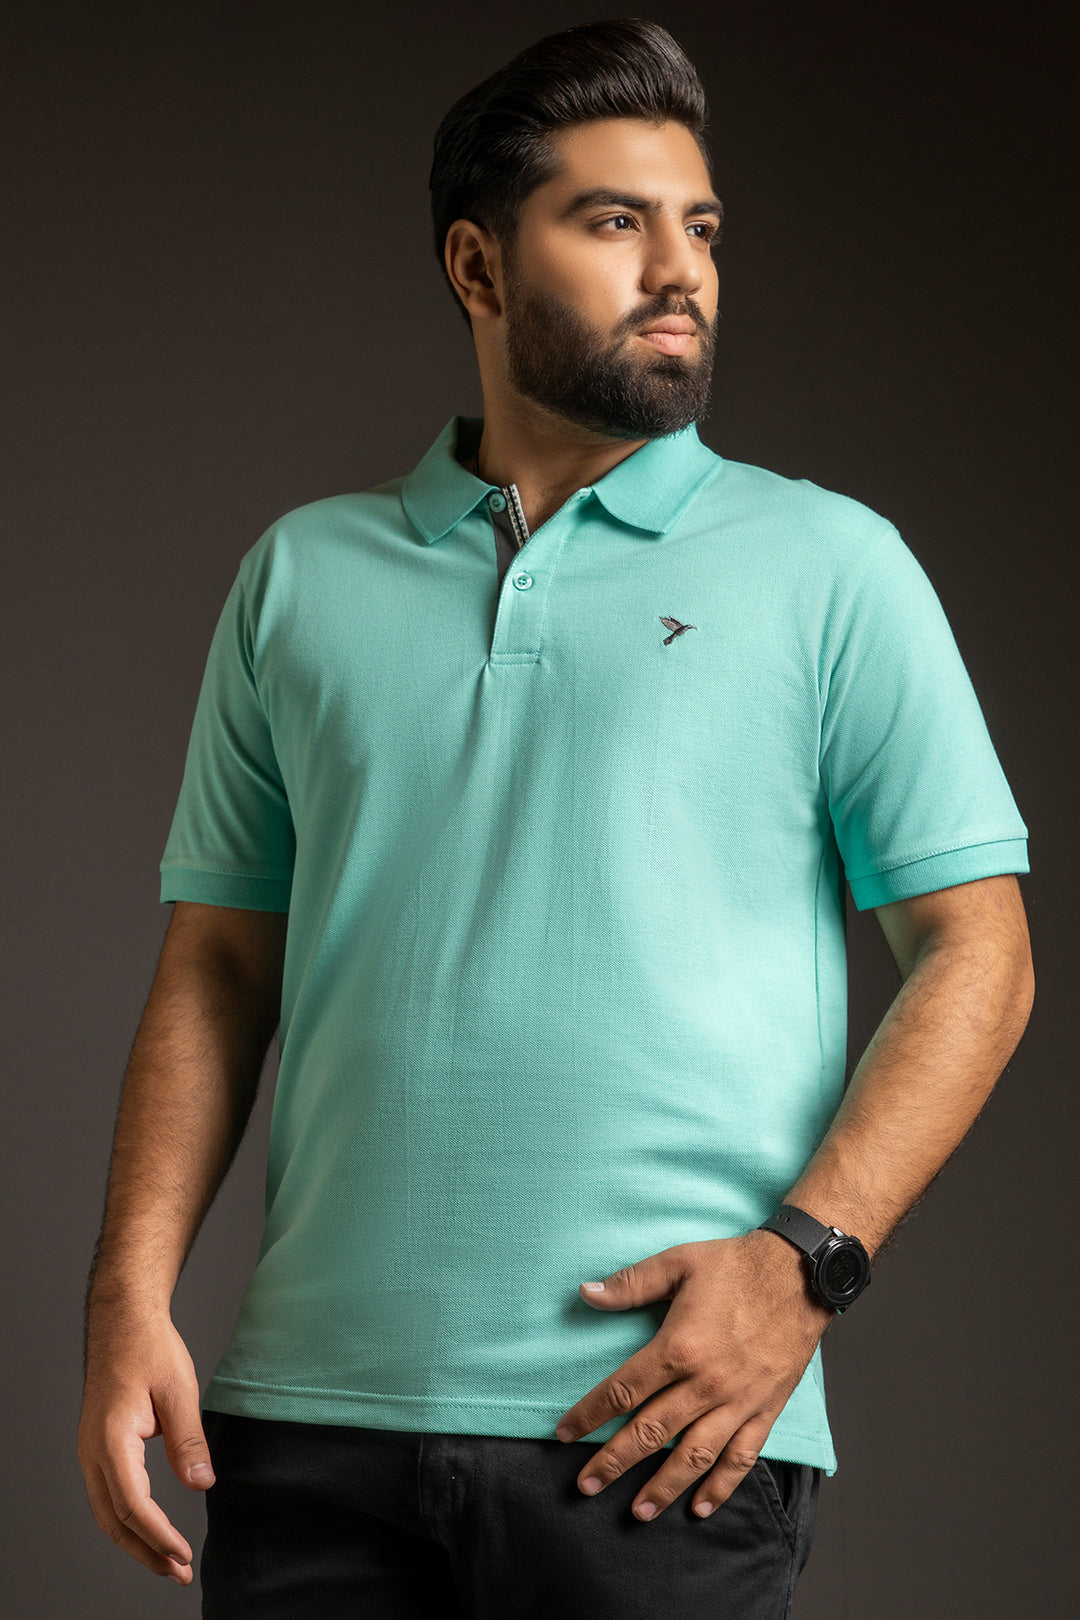 Pool Blue Embroidered Polo Shirt (Plus Size) - S23 - MP0217P